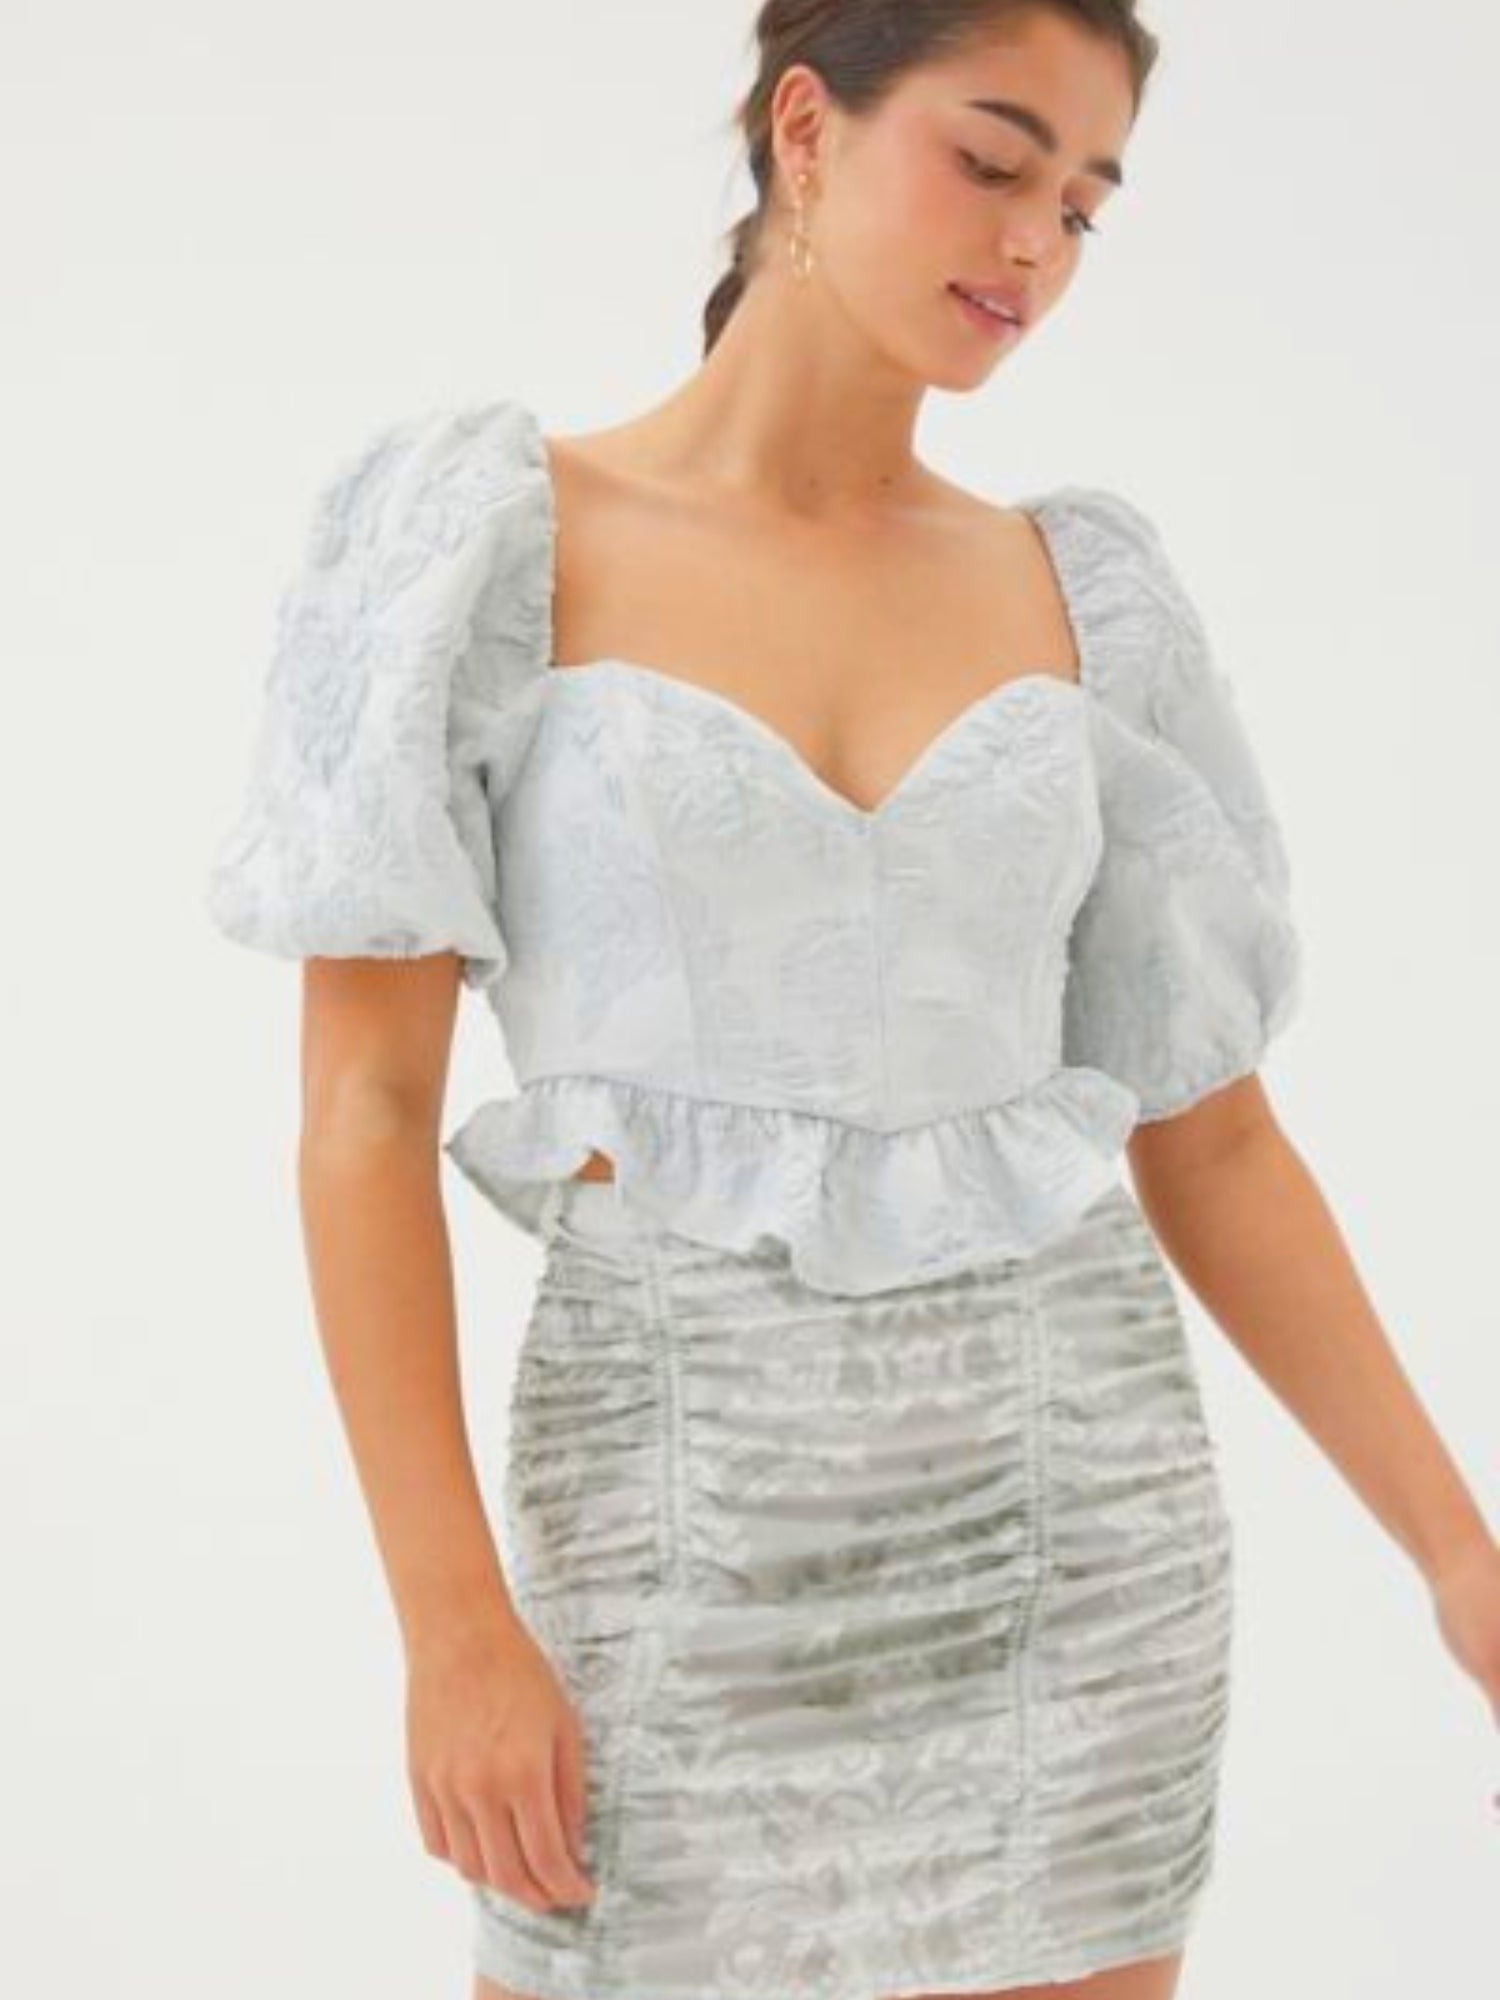 The Lydia Crop Top - The Lydia Crop Top by For Love & Lemons is a fairytale crop top MUST HAVE. Features puff sleeves, a light blue & silver jacquard fabric with ruffle detail. This top features a back zipper with a top button closure and boning on the fr